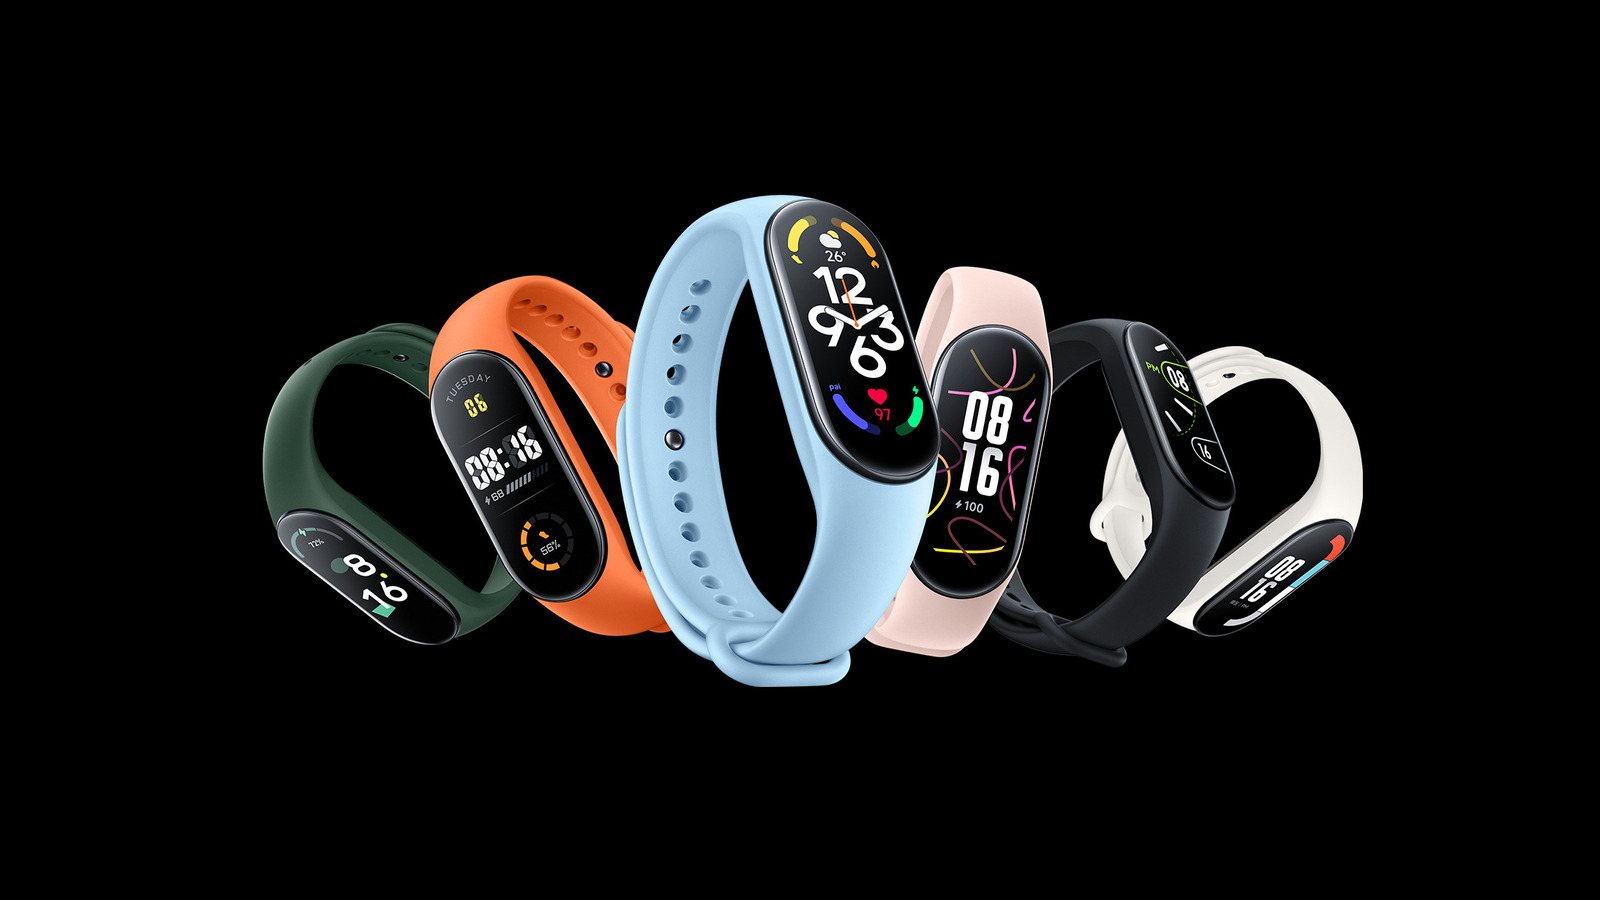 https://www.slashgear.com/img/gallery/xiaomi-mi-band-7-launches-with-a-25-bigger-screen-and-always-on-display/l-intro-1653422414.jpg